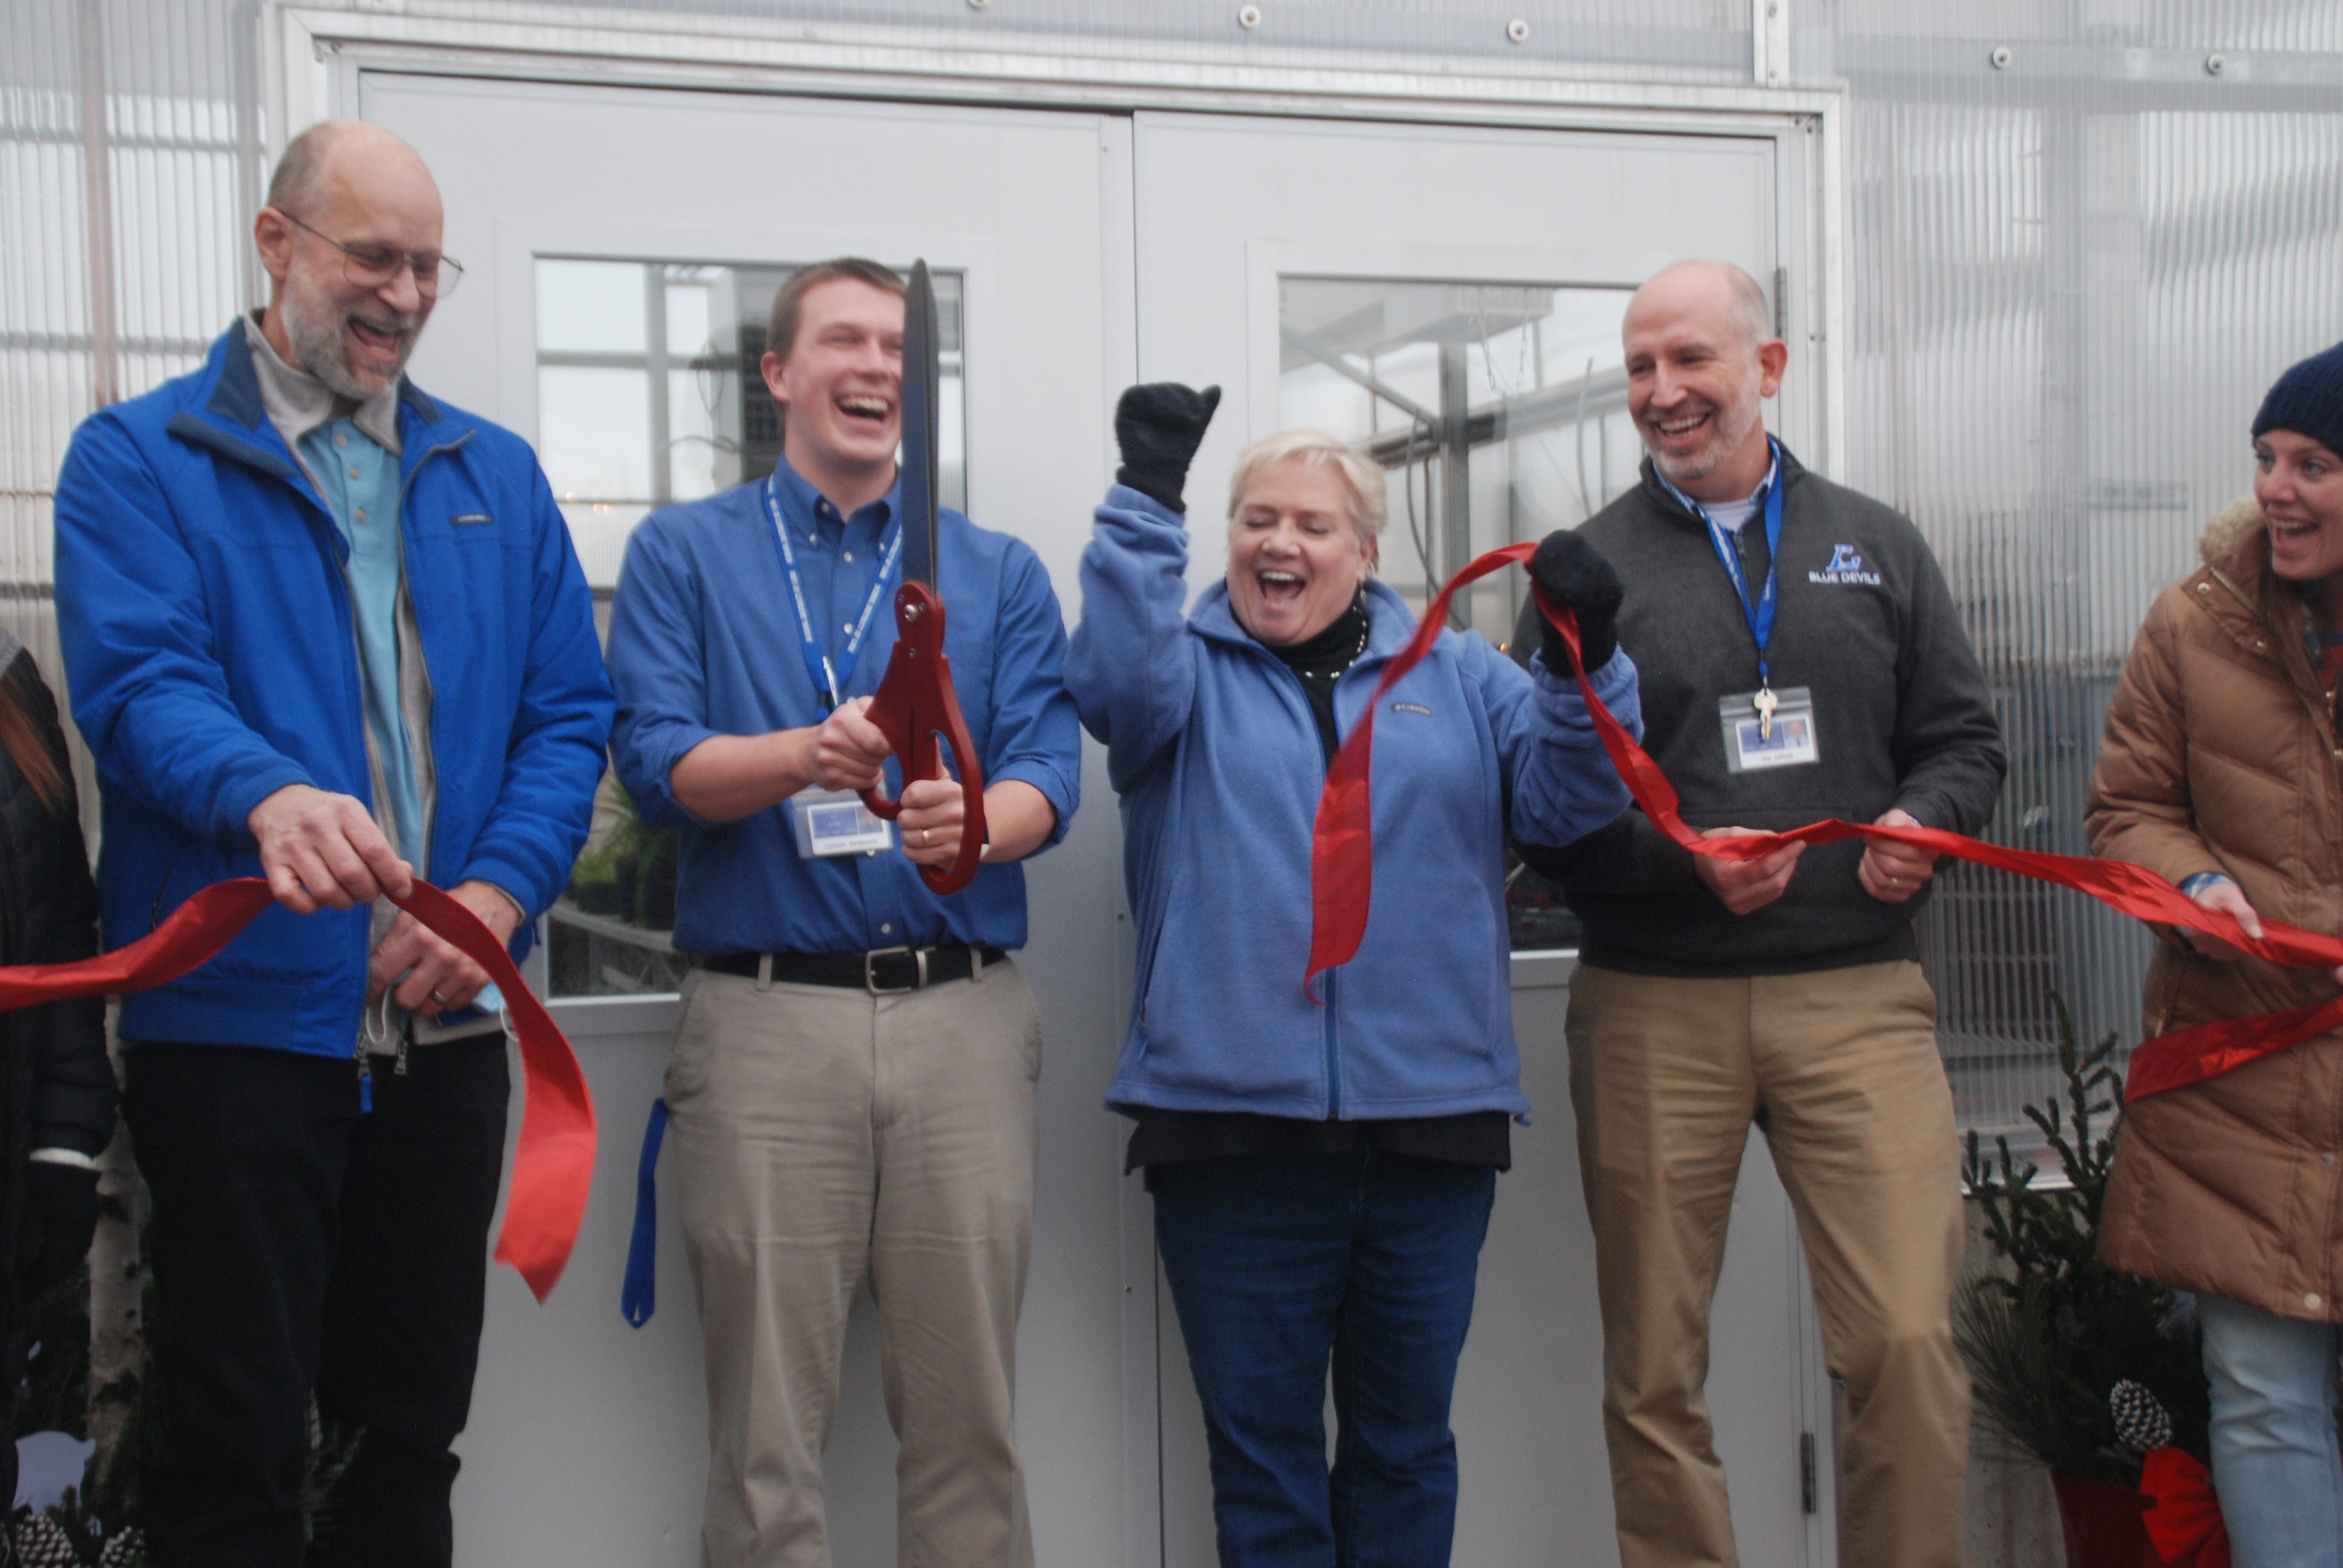 A group gathered to celebrate the dedication of Lodi High School’s new greenhouse last week. From left, H. Adam Steinberg Lodi School Board President, Lodi High School Agriculture instructor Connor Anderson, Ann Groves Lloyd, City of Lodi Mayor and Lodi High School Principal Joe Jelinek helped cut the ribbon in front of the state-of-the-art greenhouse at the school on December 7. The celebration was delayed by about a year due to the pandemic.